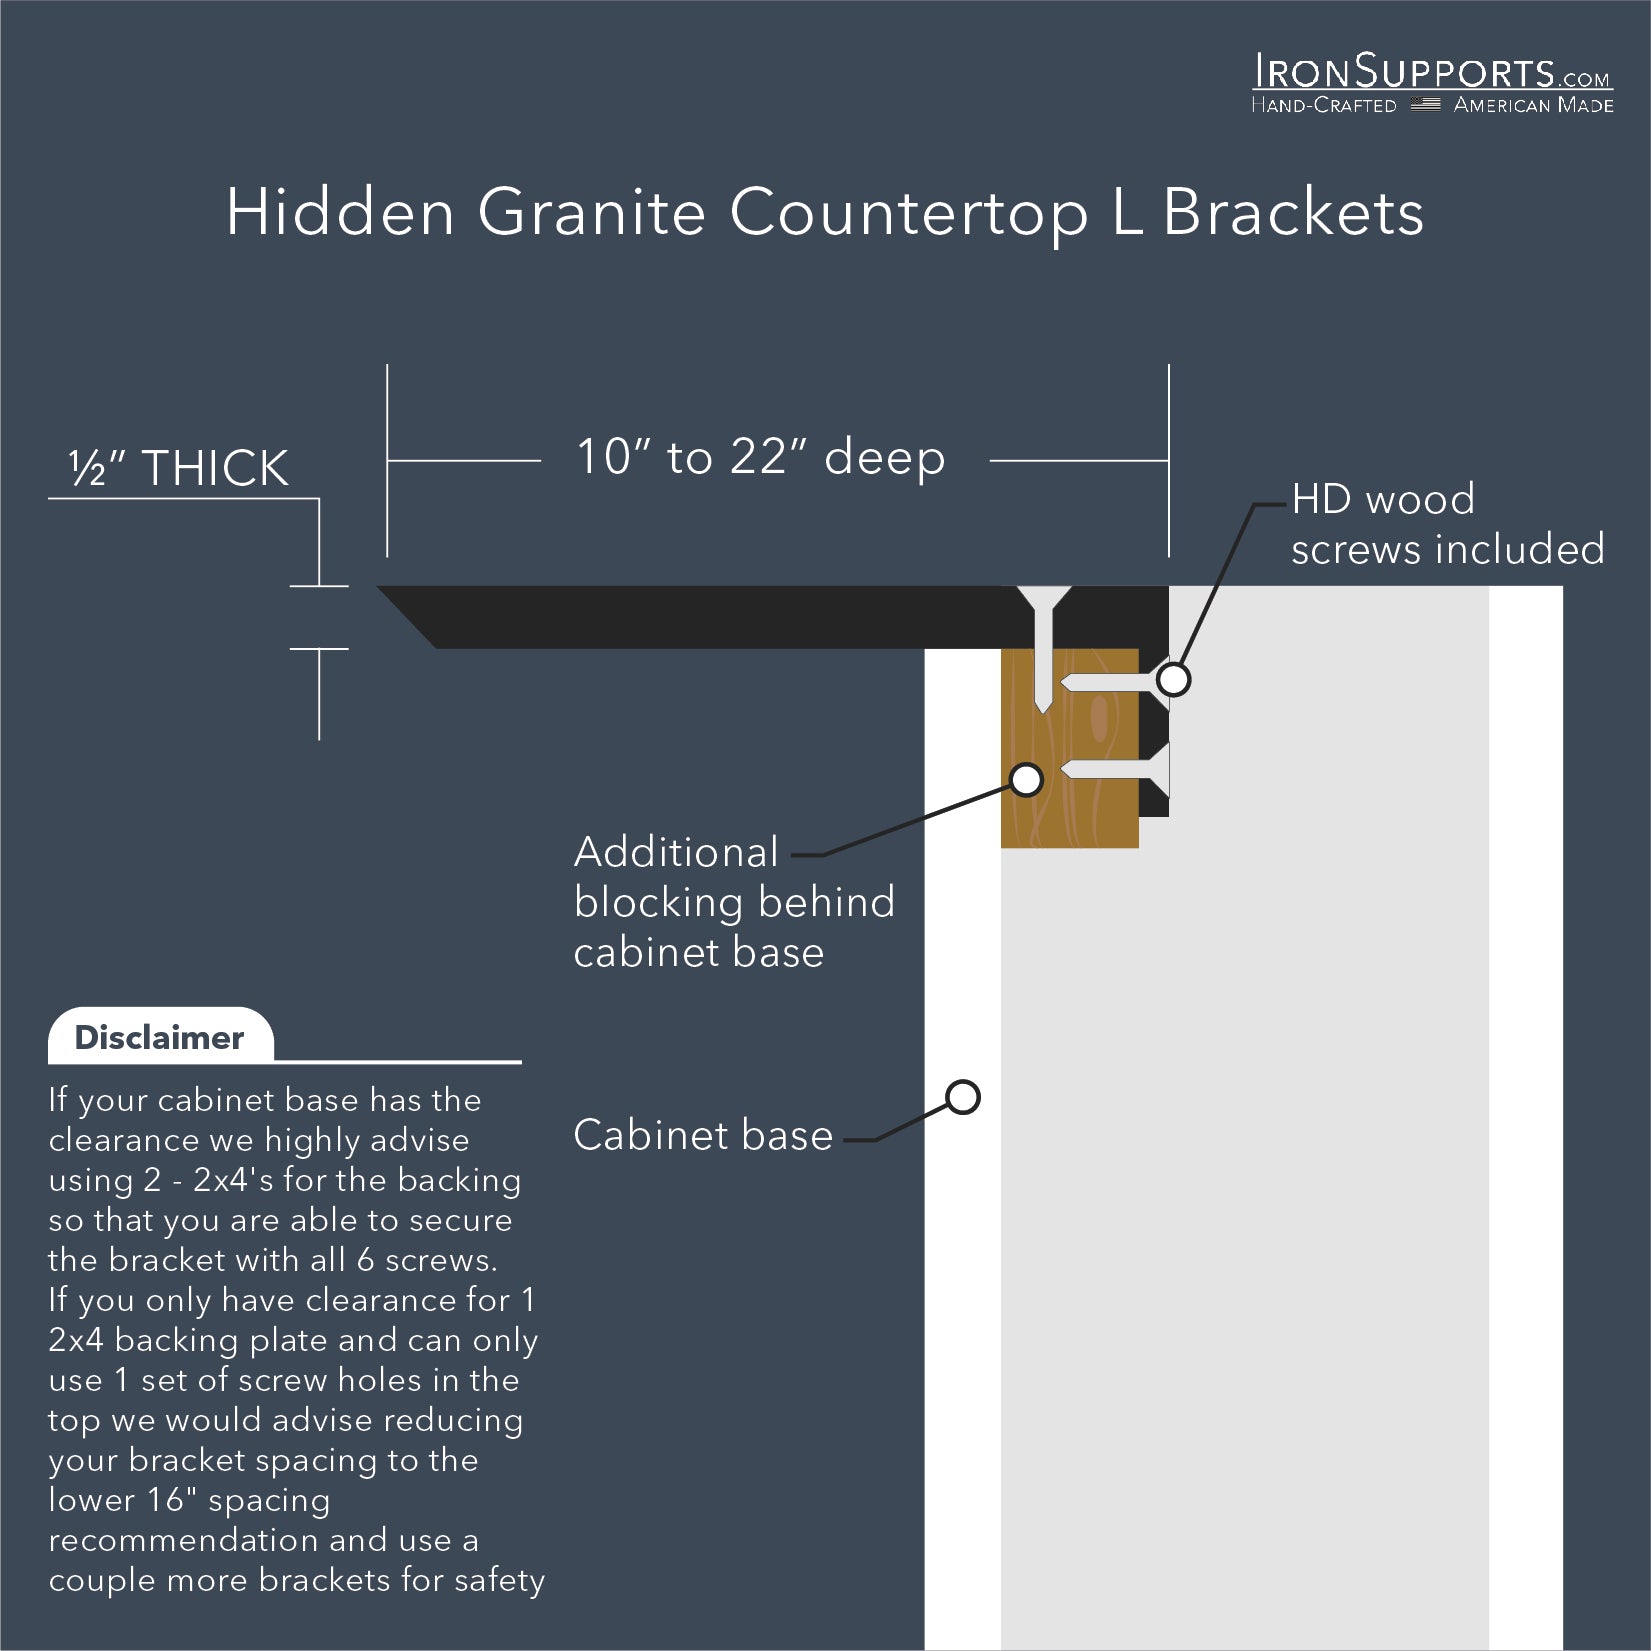 Illustration detailing Hidden Granite Countertop L Bracket length. Provides sturdy support for kitchen islands and pony walls.